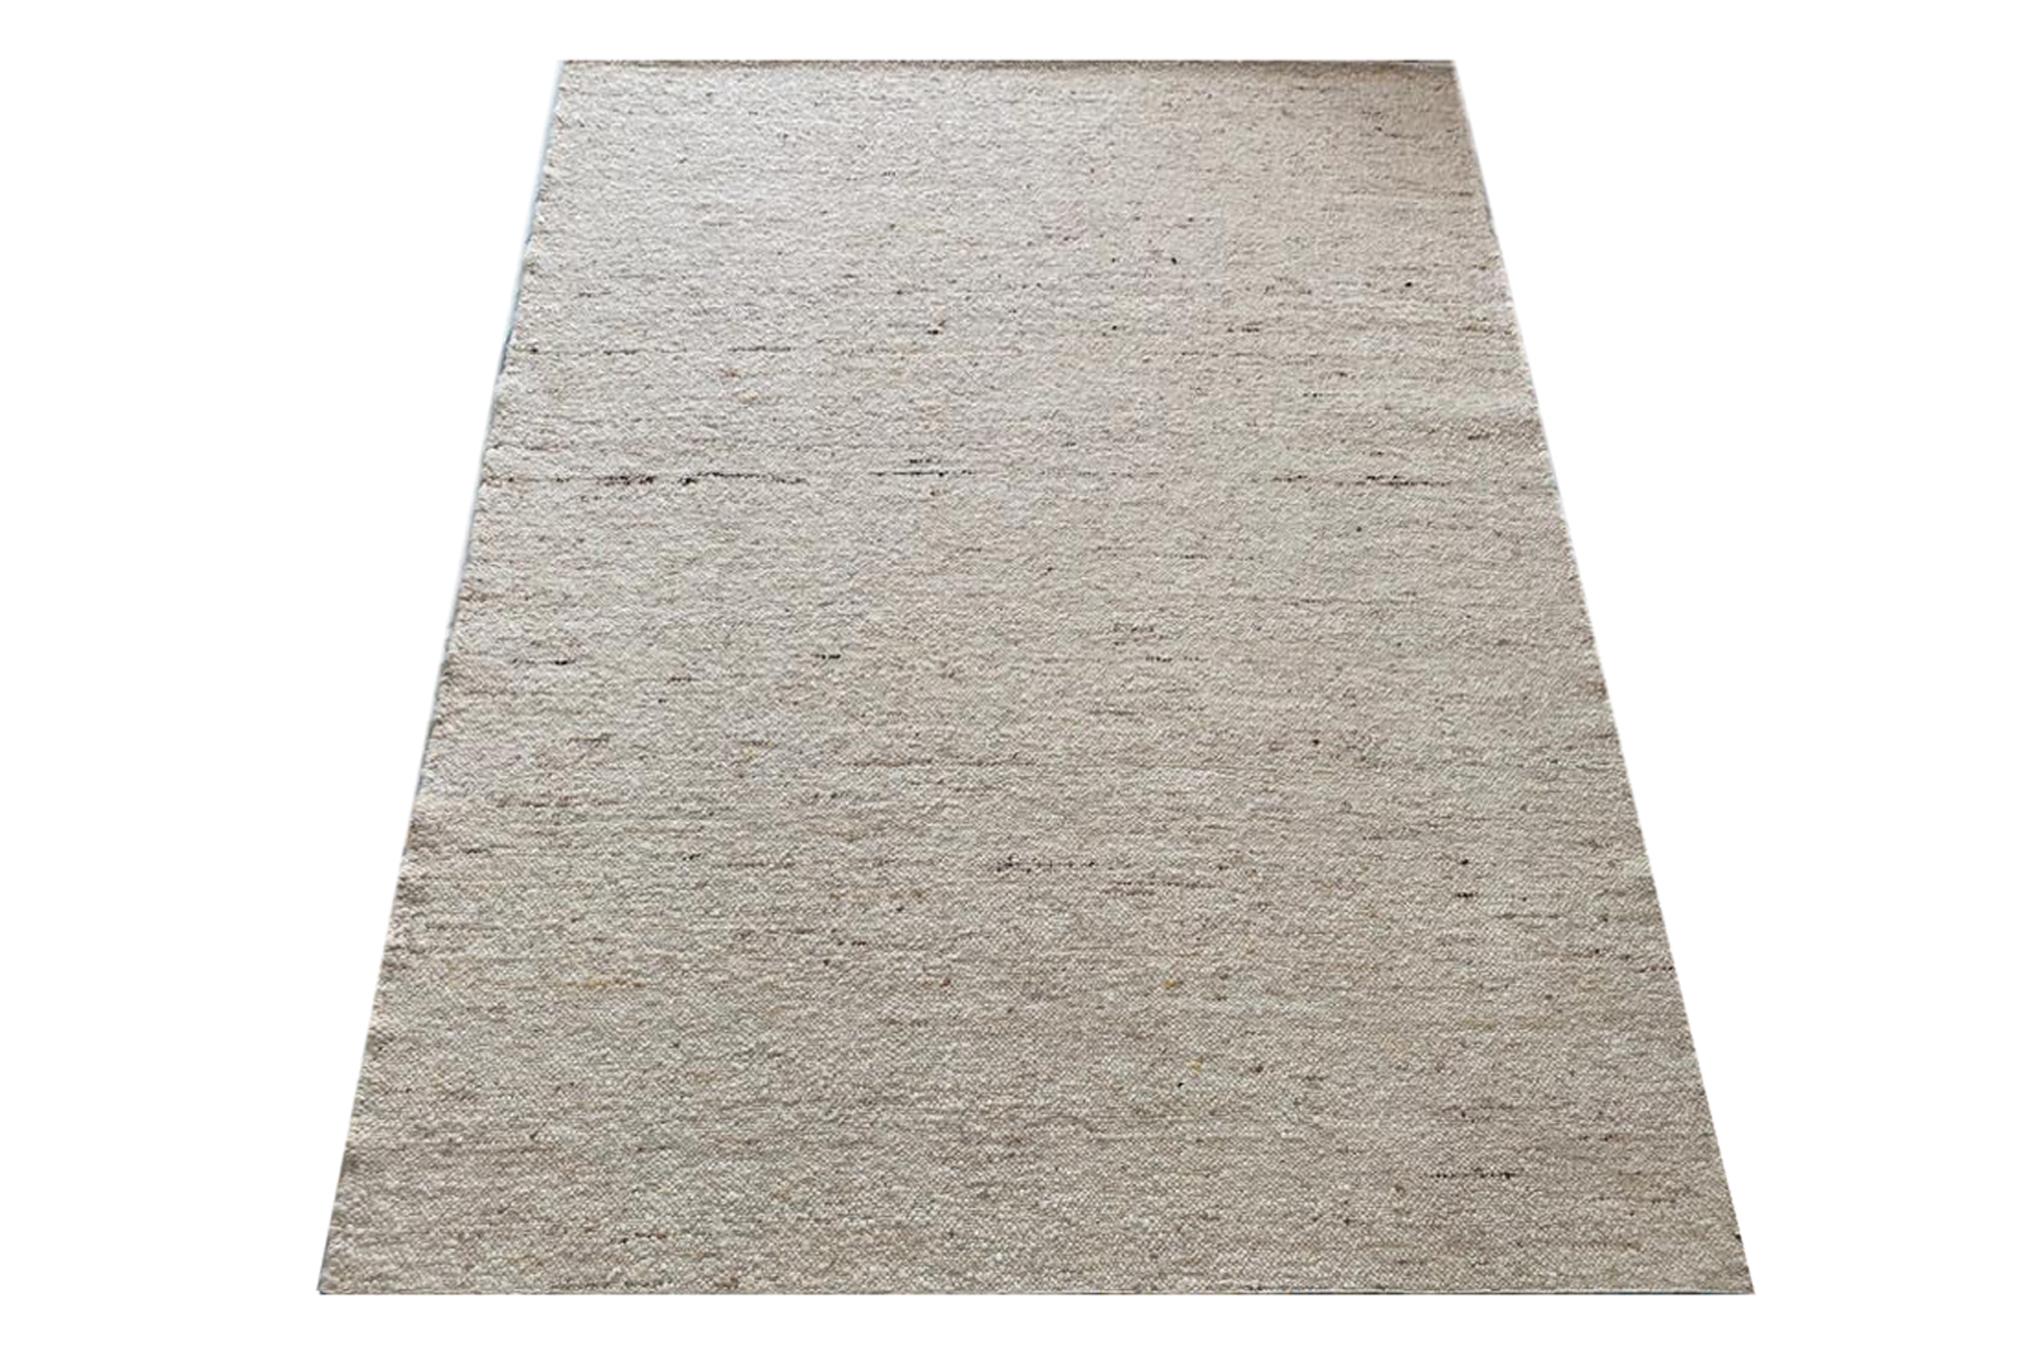 Hand-woven raw wool.

9' x 12'

New

Origin: India

Field Colors: White

Accent Colors: Ivory, Light-Brown, Brown